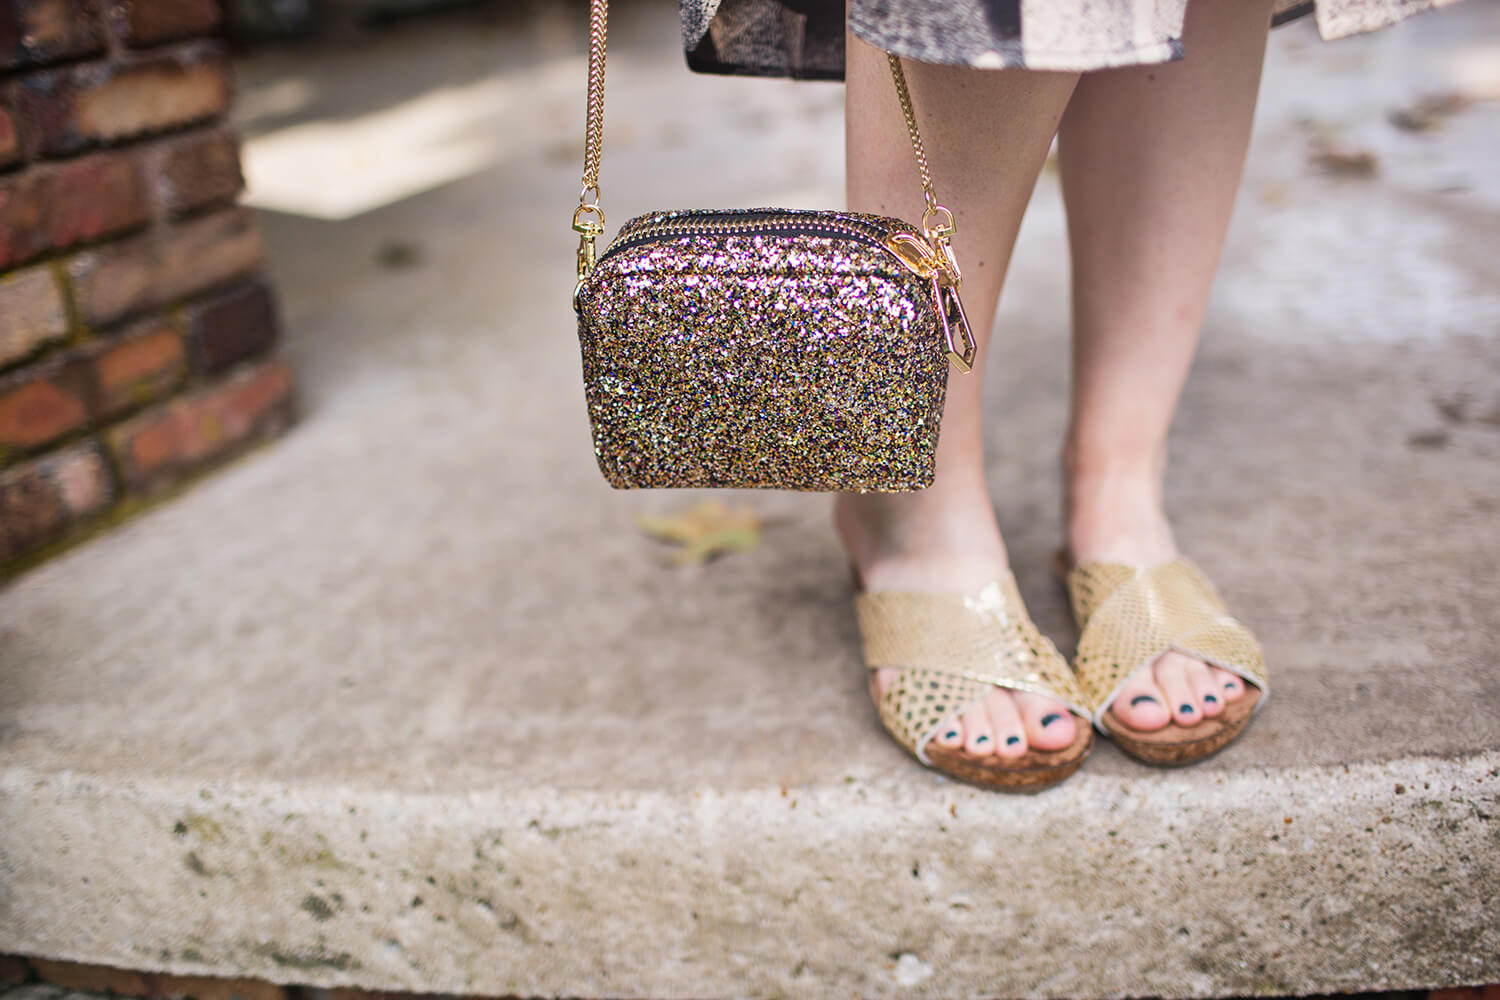 Glitter purse and shoes